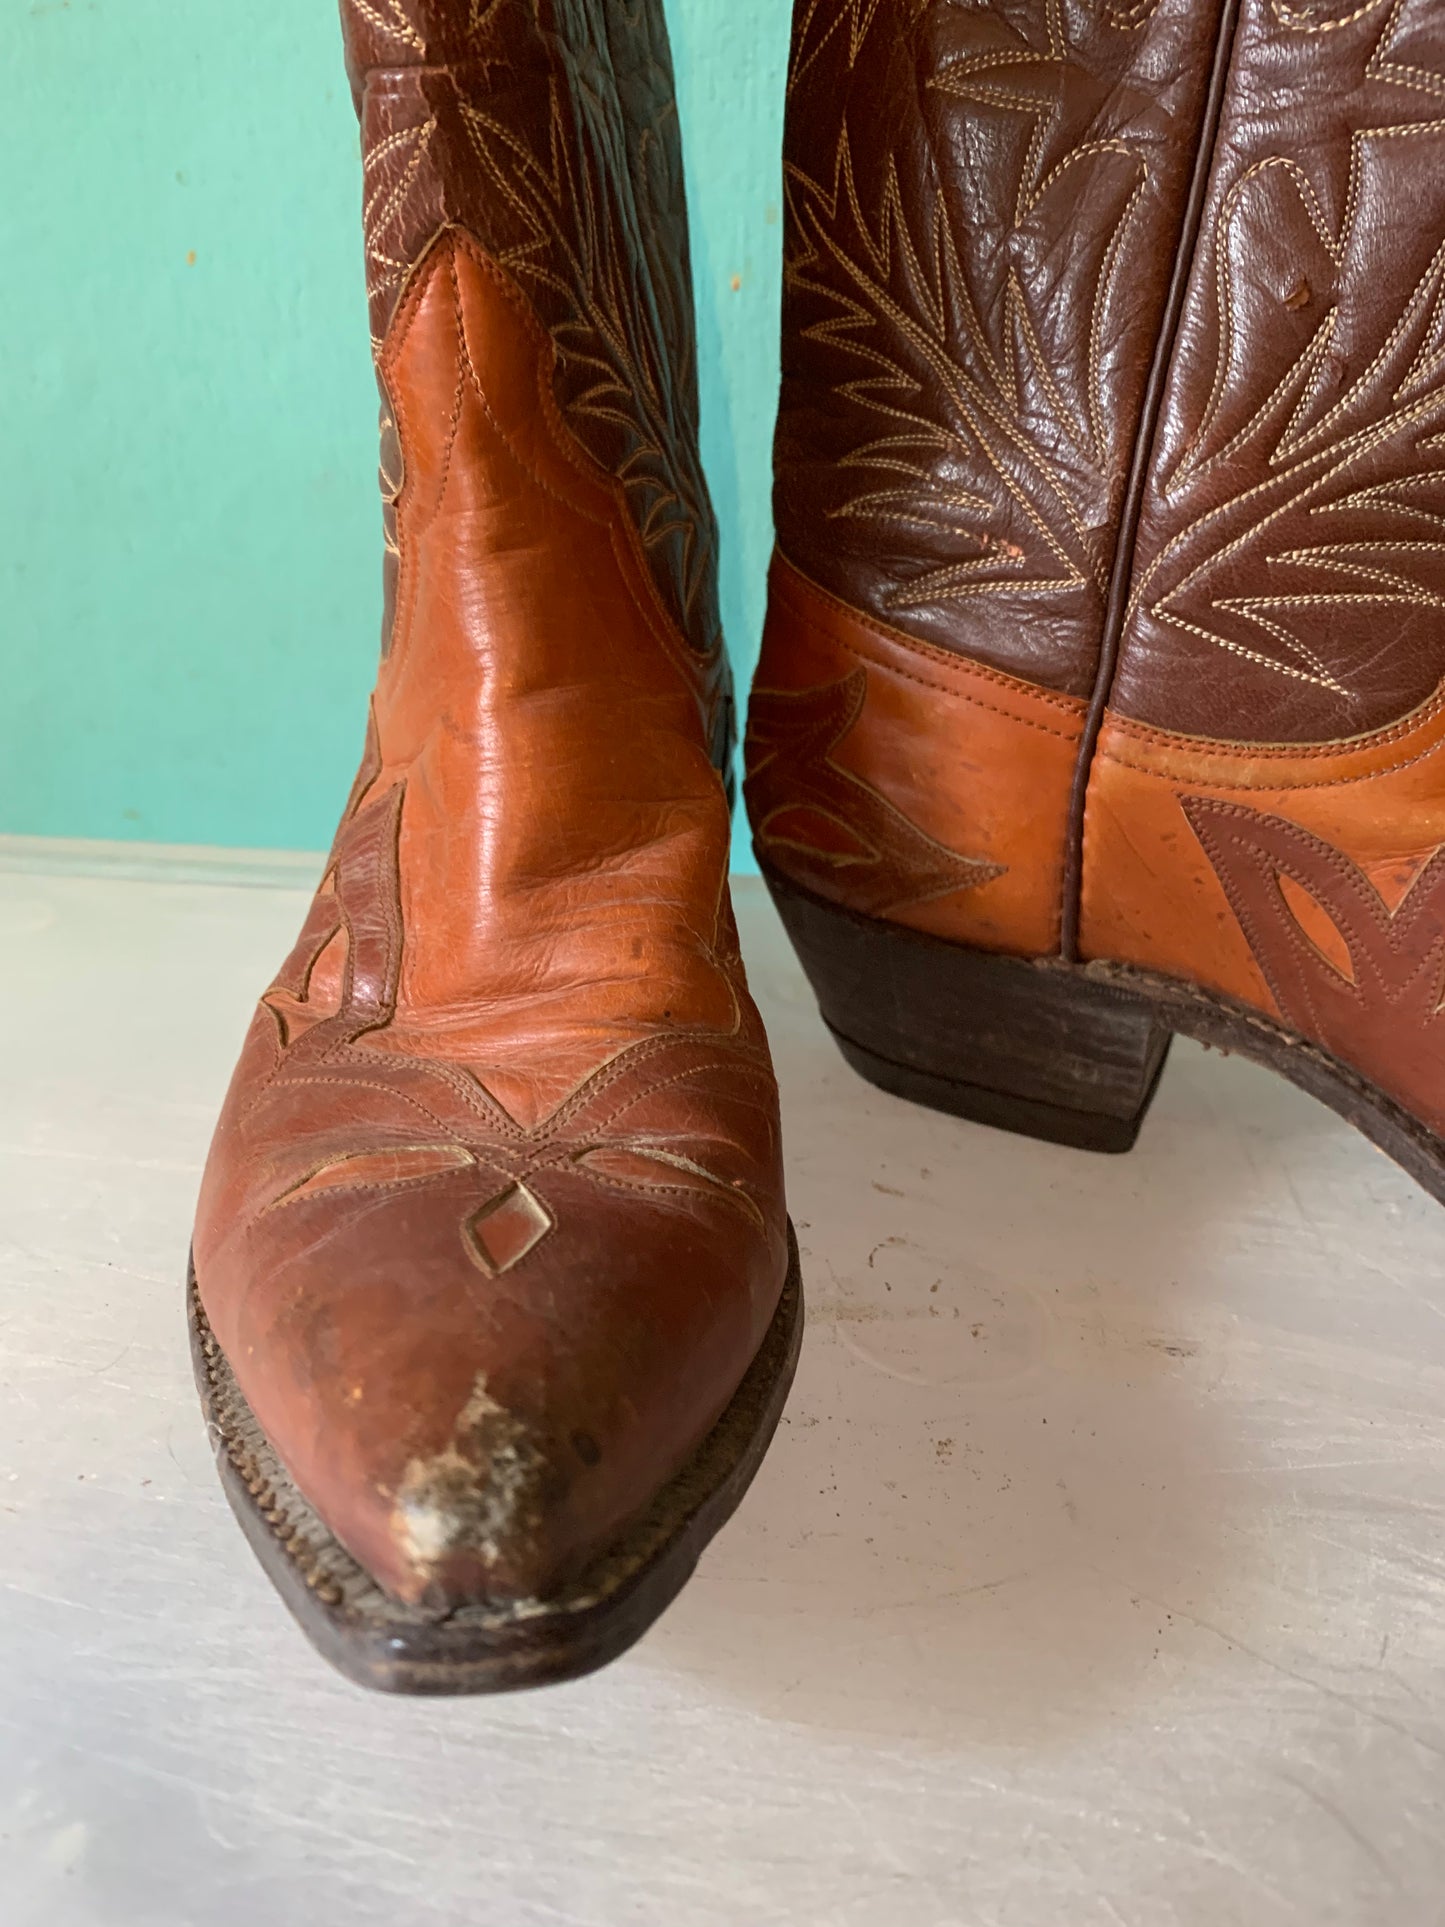 Westex Top Stitched Cognac and Brown Leather Calf High Western Boots circa 1960s